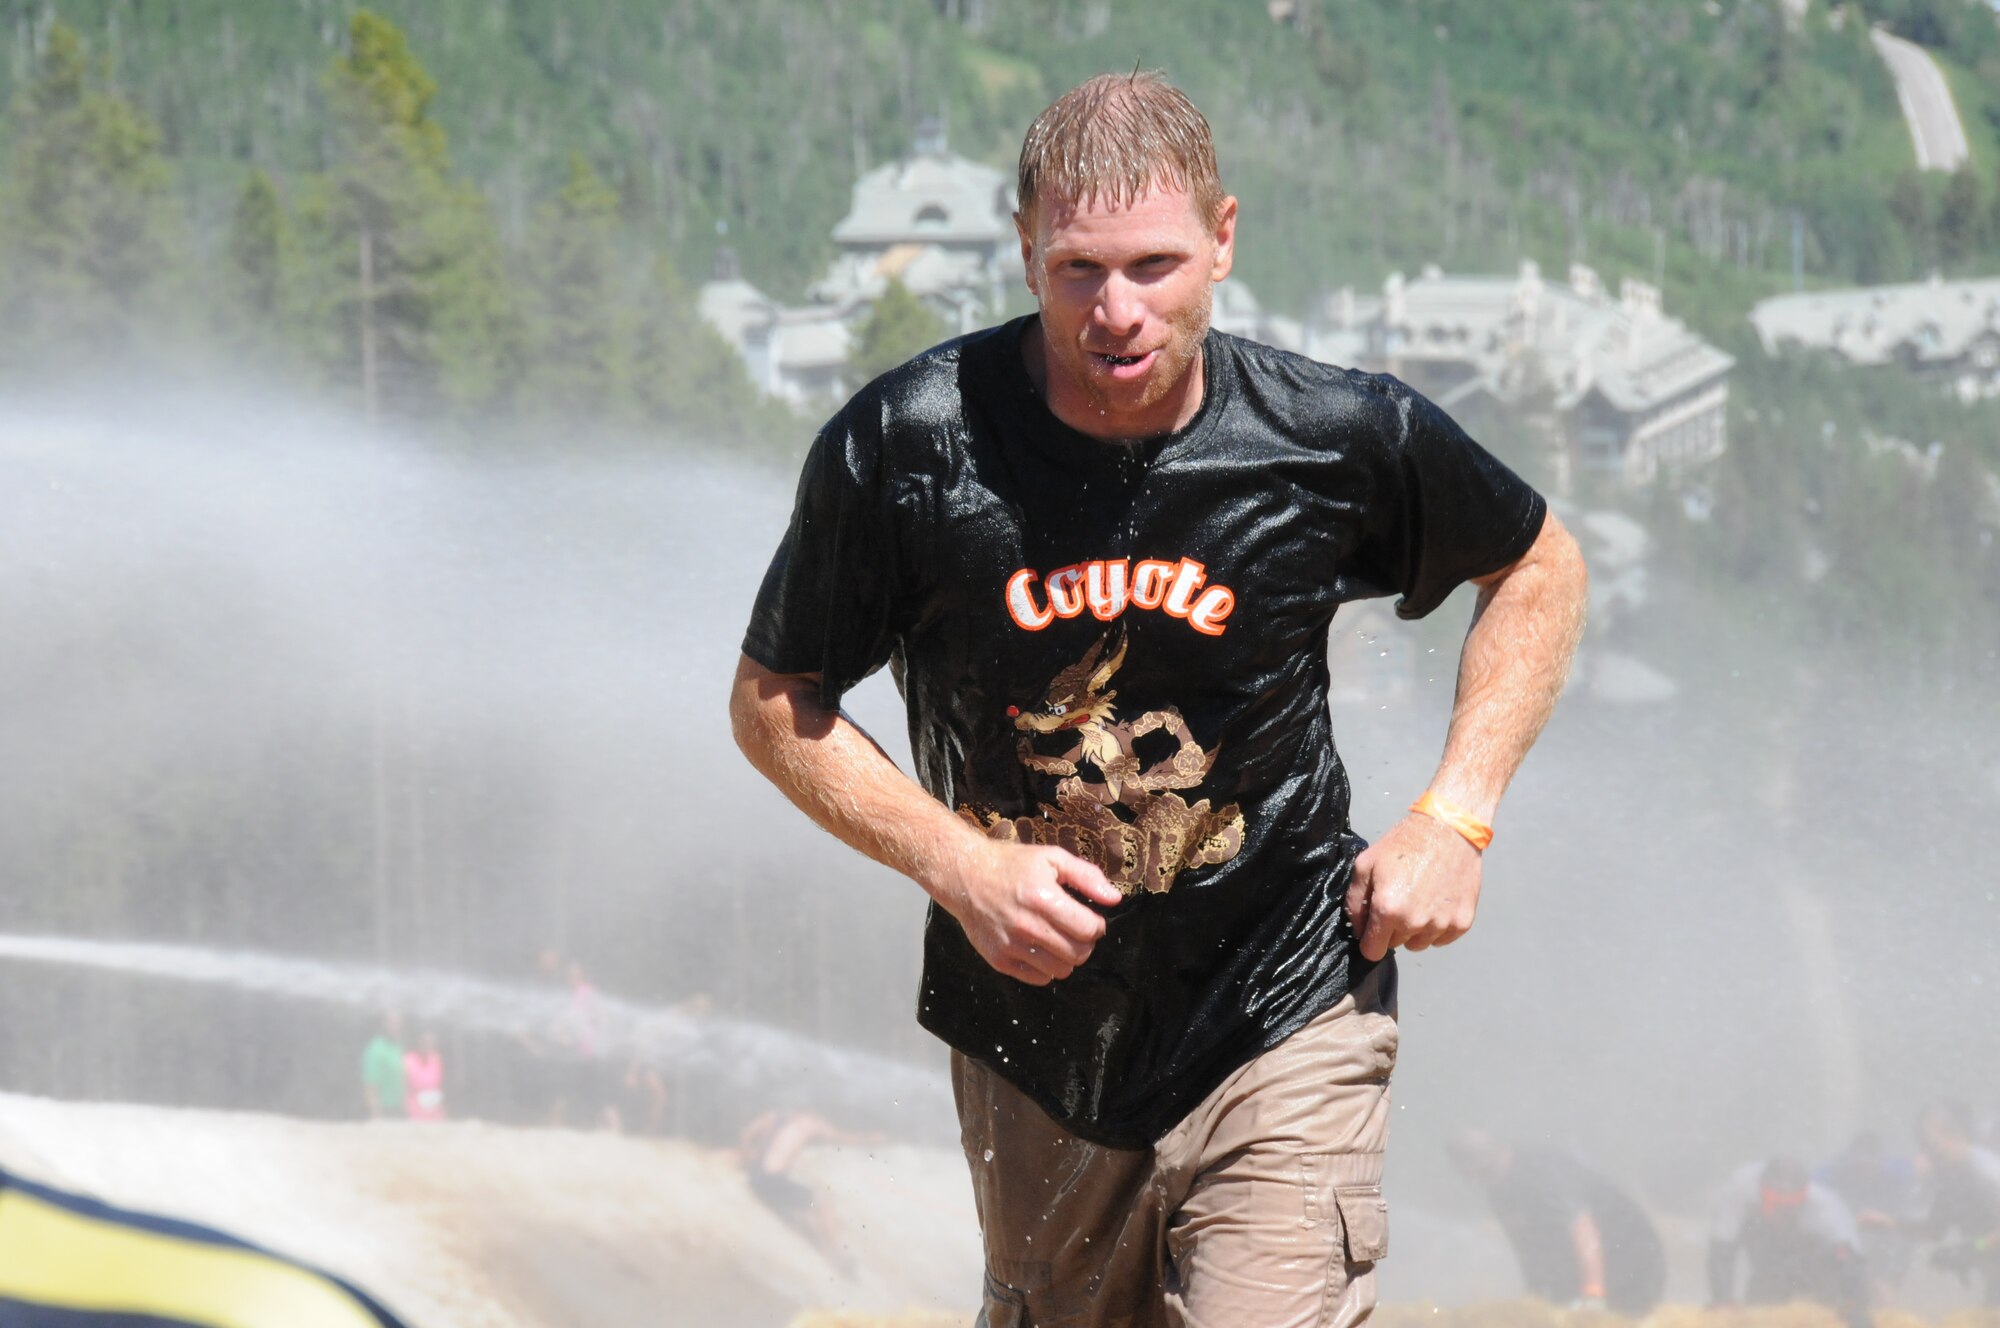 Master Sgt. Doug Hickman nearing the end of one of the many obstacles in the Tough Mudder course. (photos by Master Sgt. Allen Pickert)